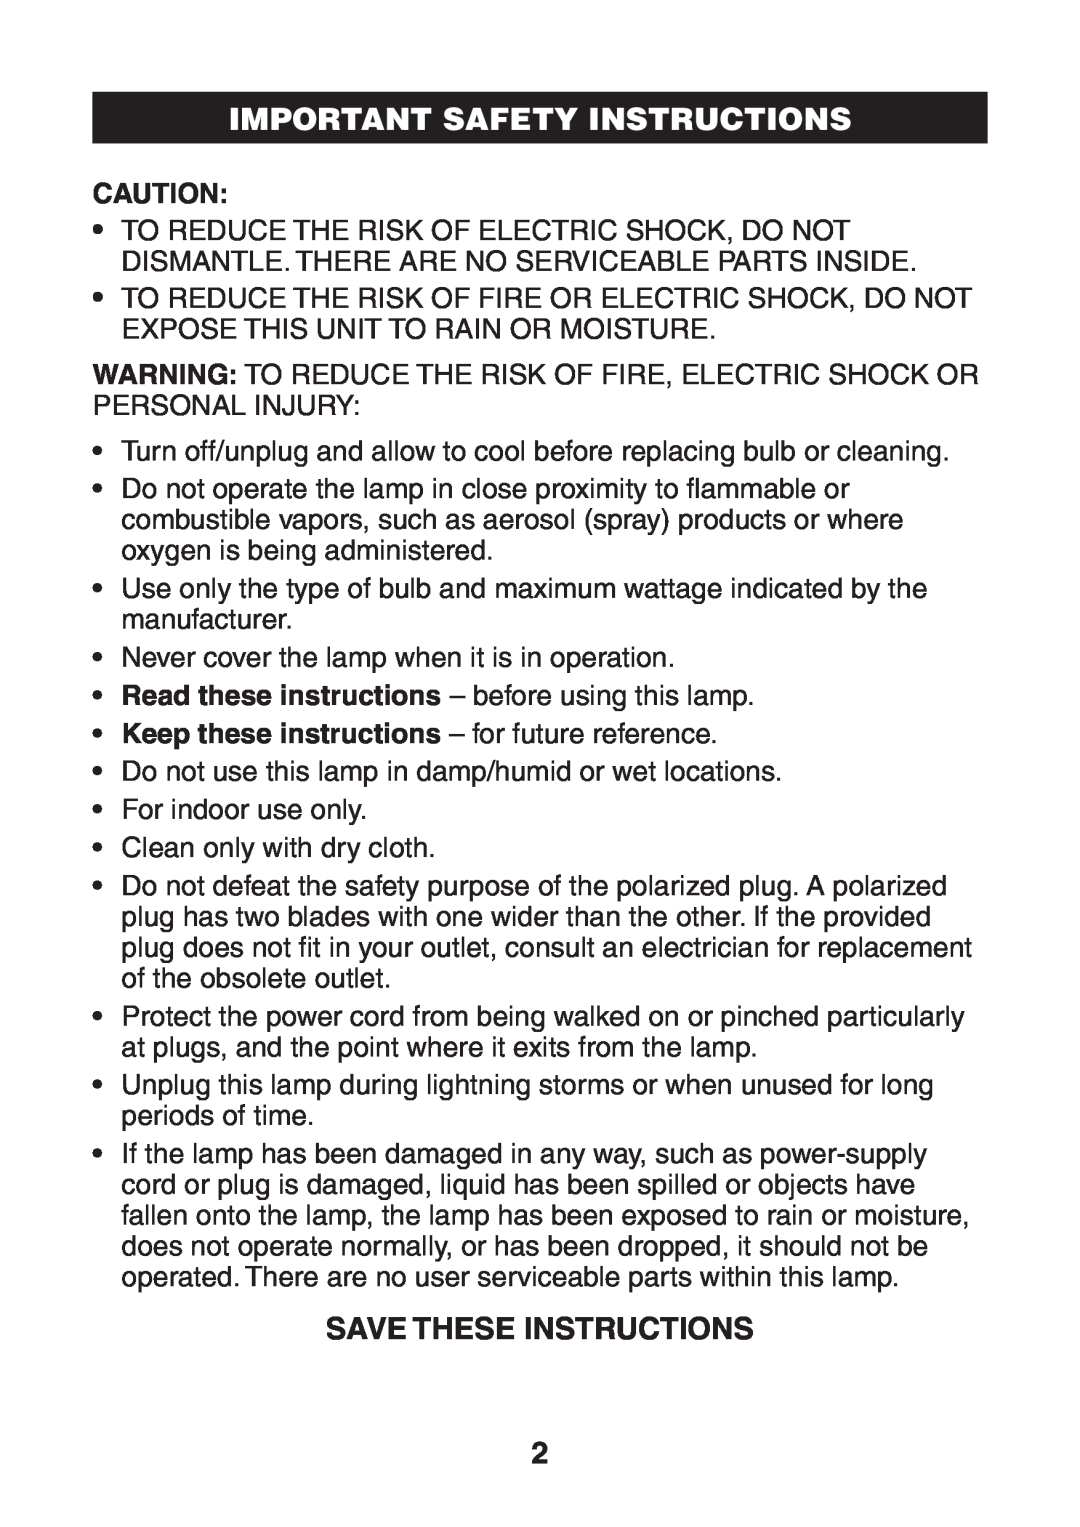 Verilux VD09 manual Important Safety Instructions, Save These Instructions, Keep these instructions - for future reference 